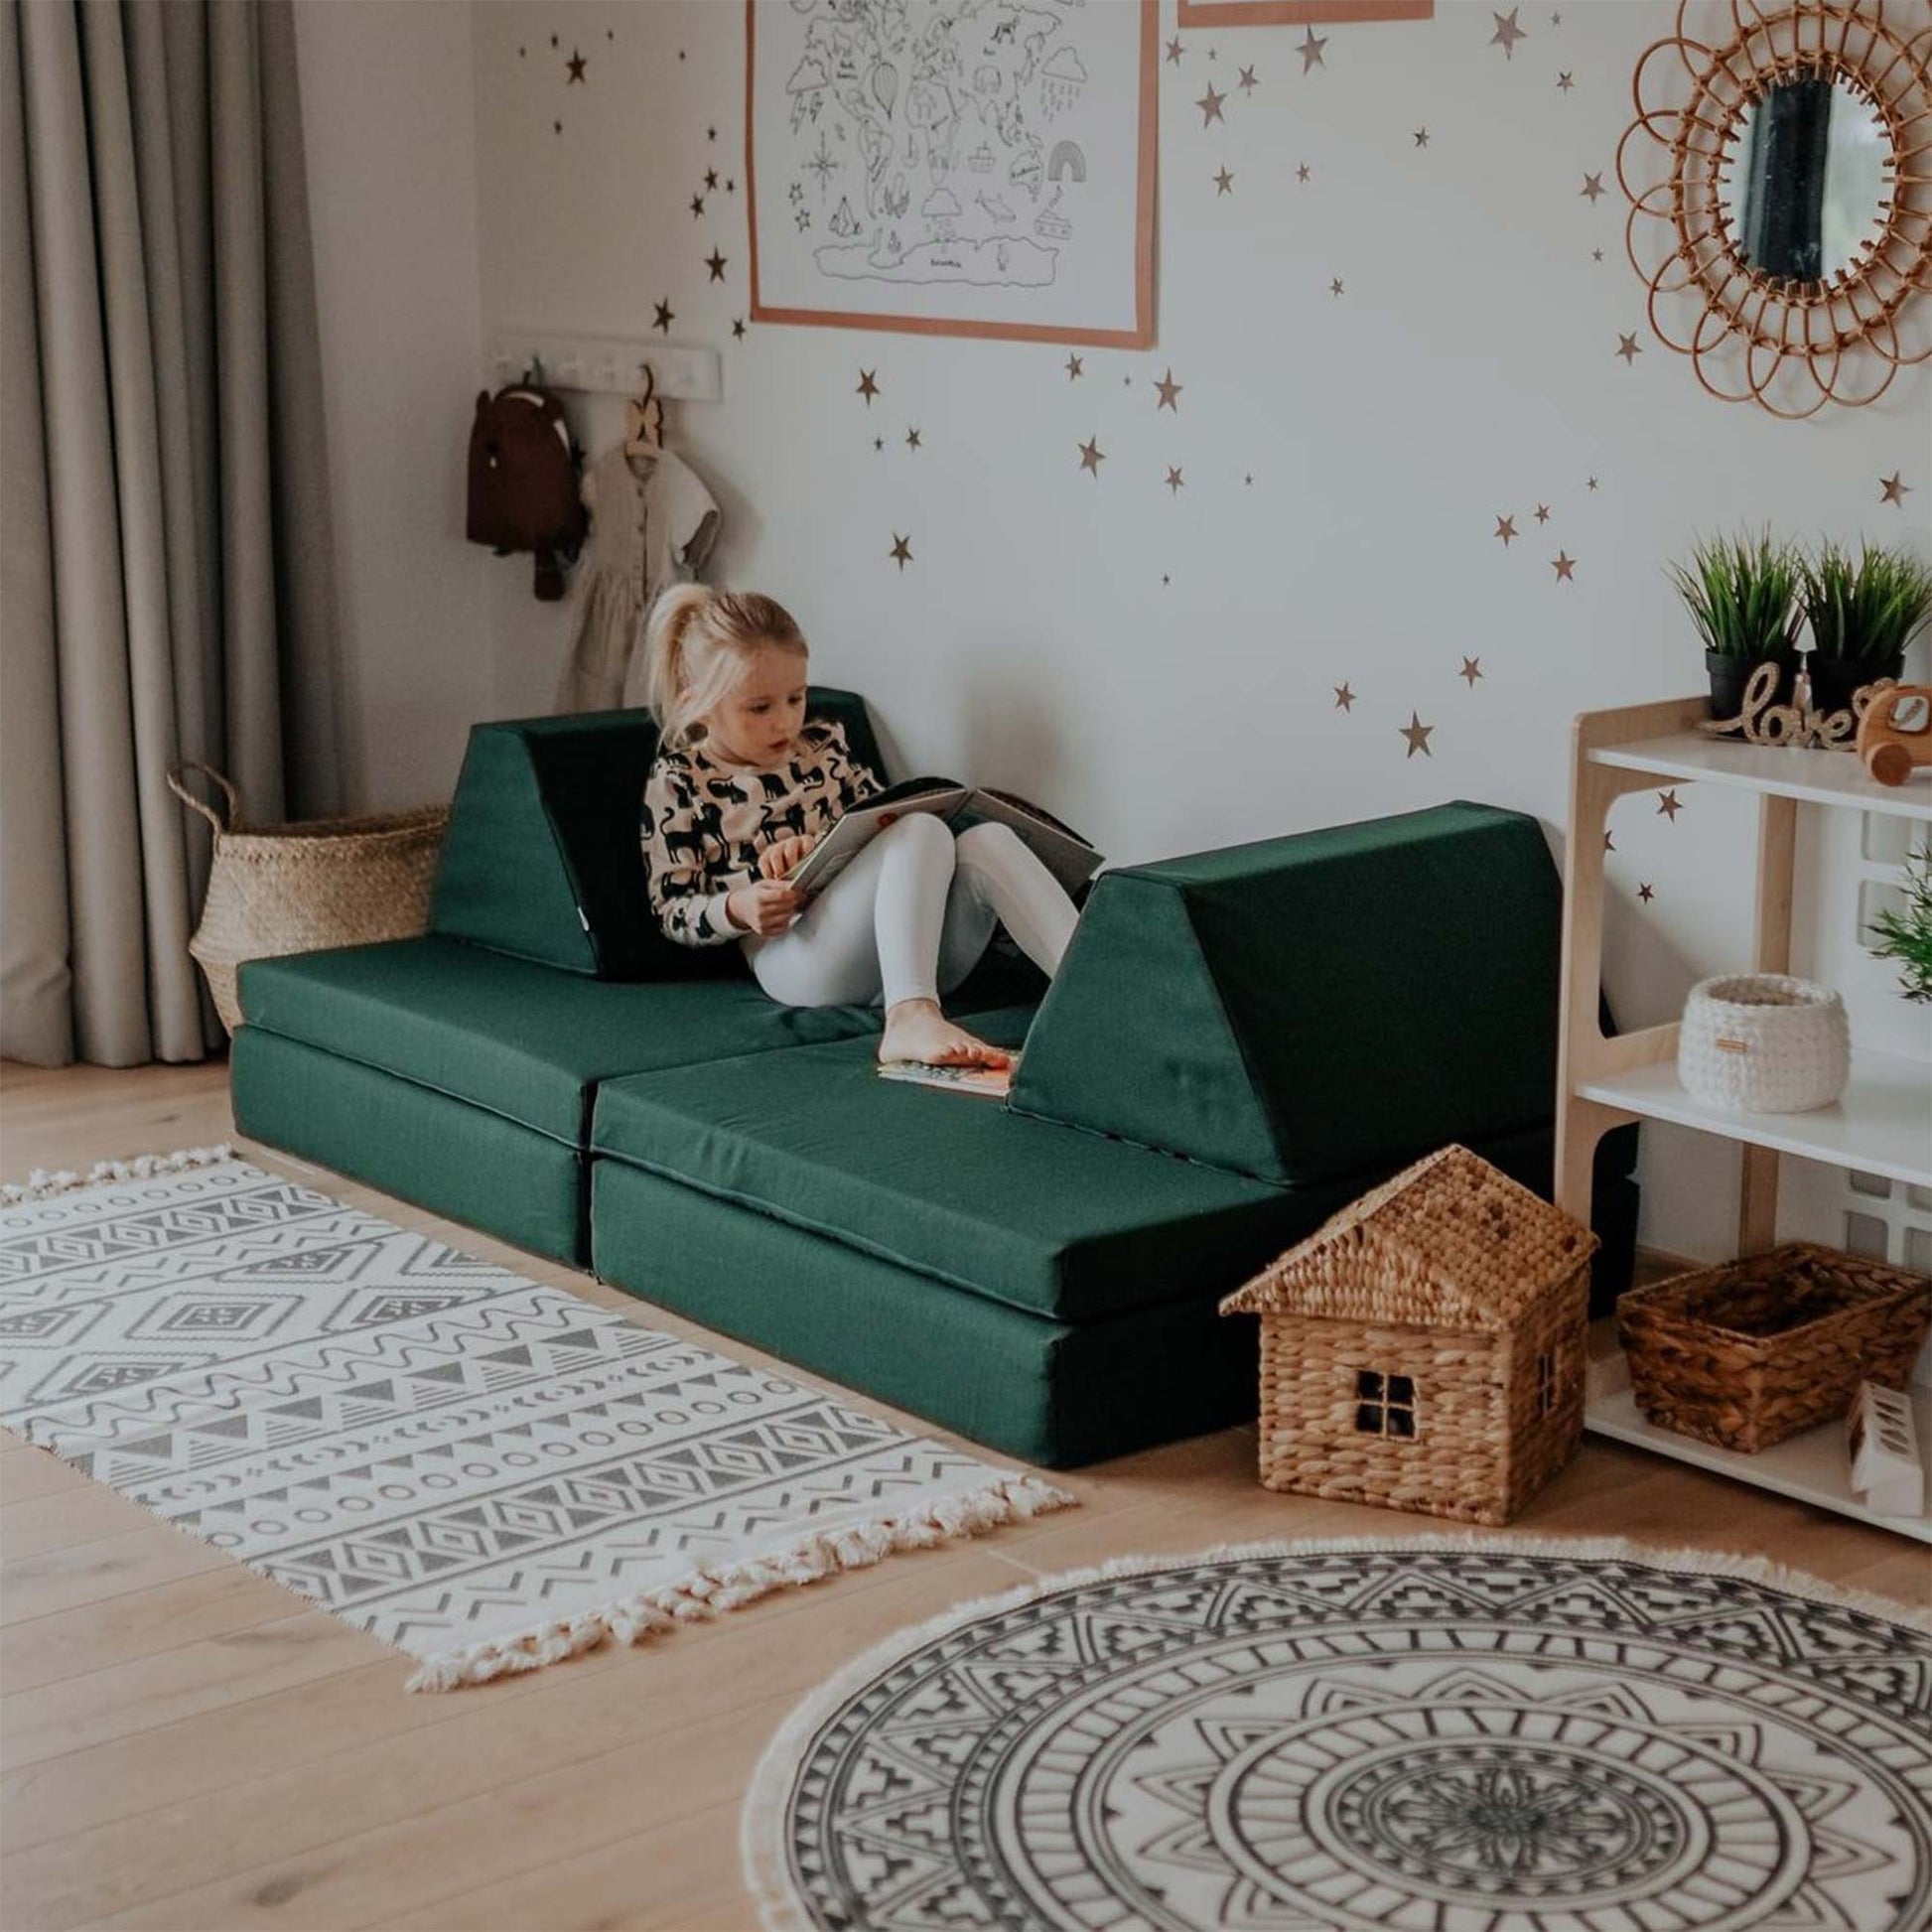 A girl reading a book while relaxing on her deep green Monboxy kid play couch